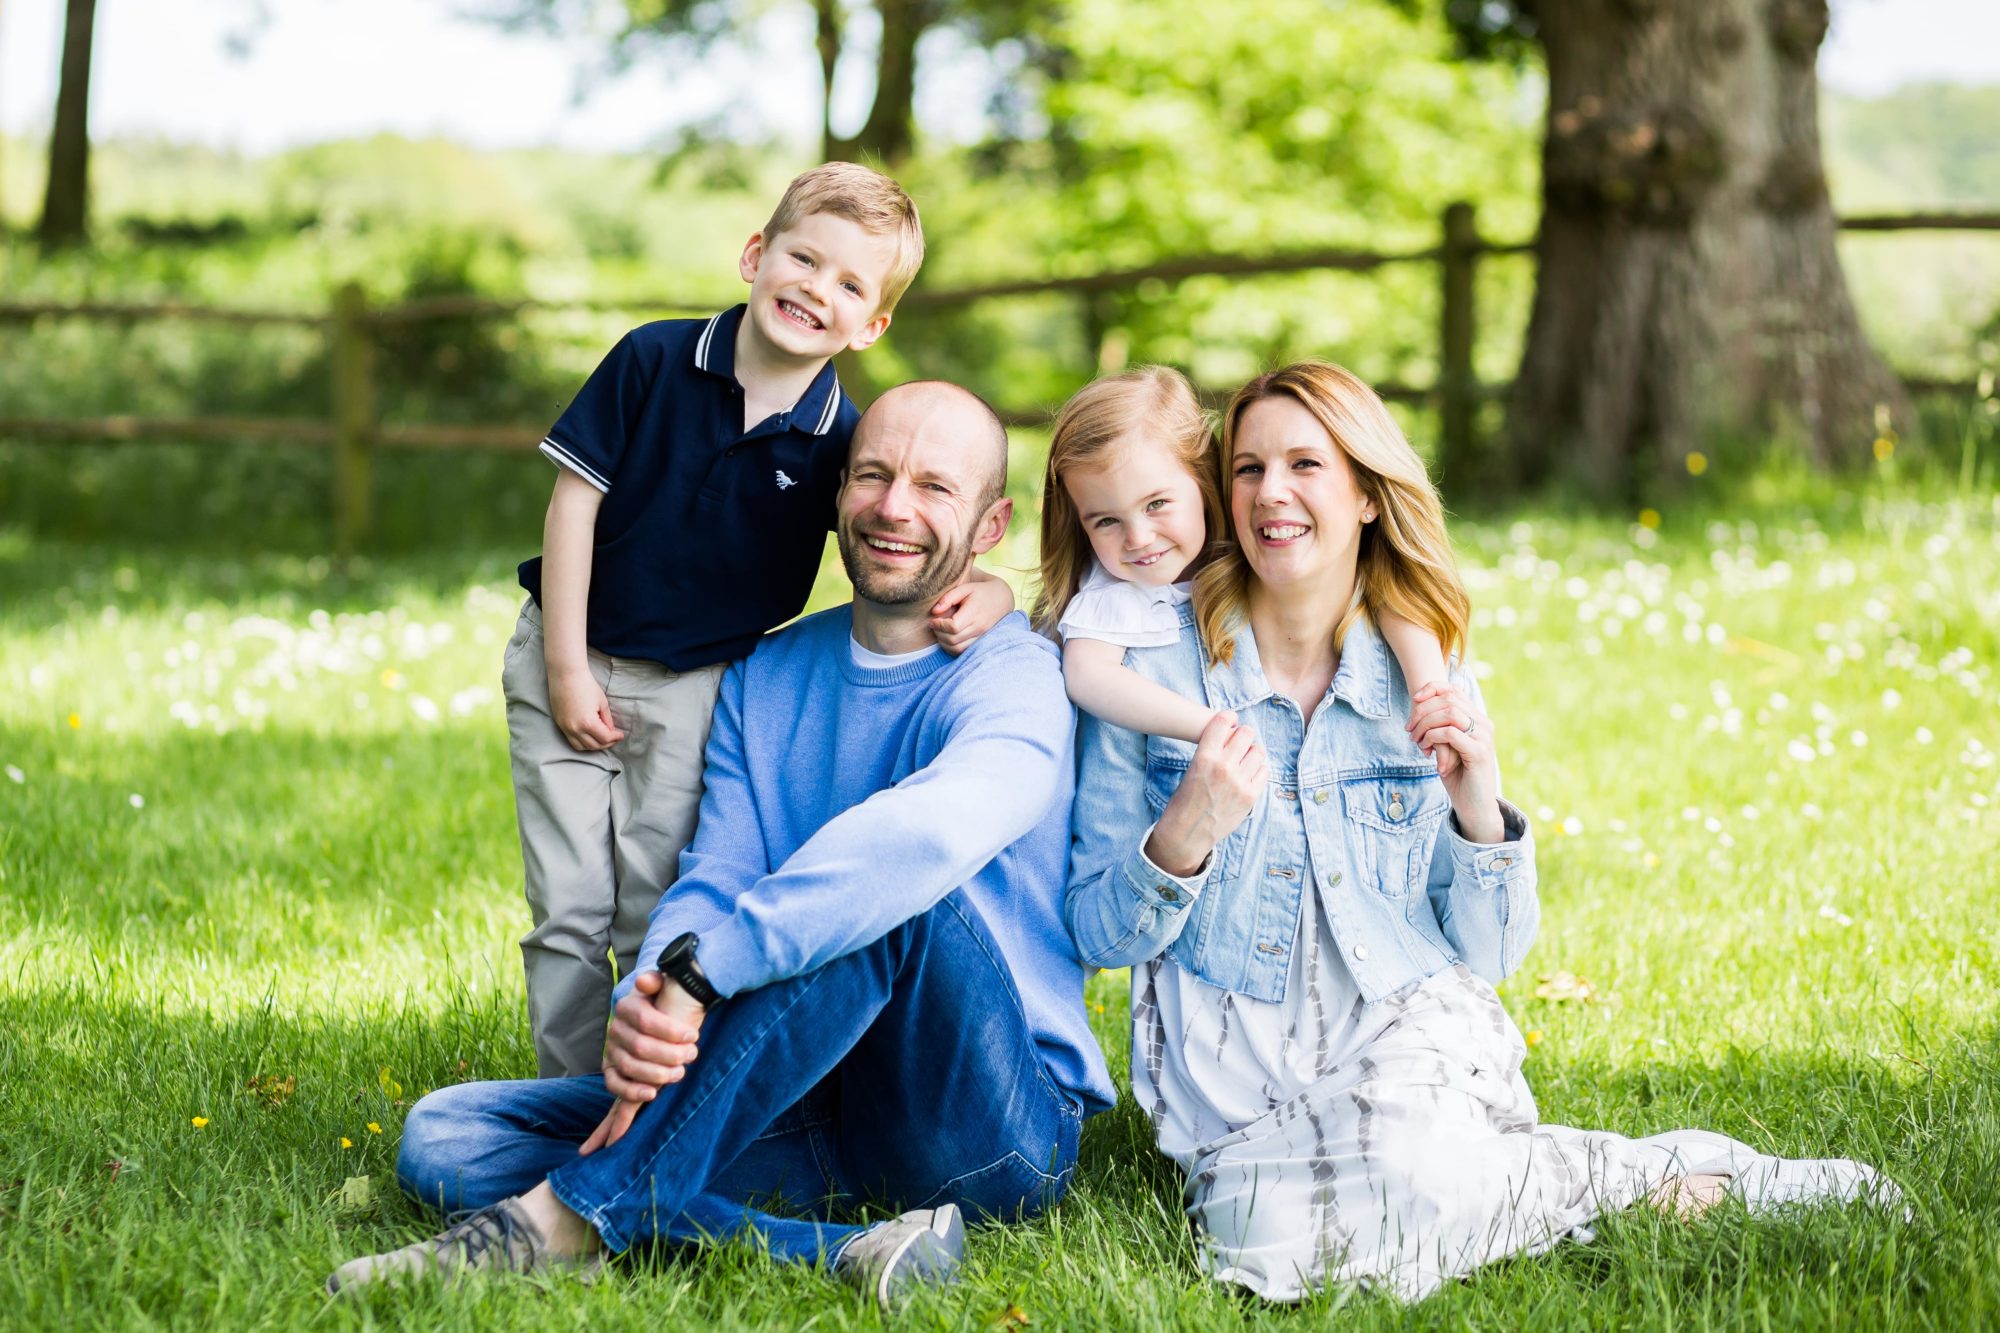 personal branding photography with your family